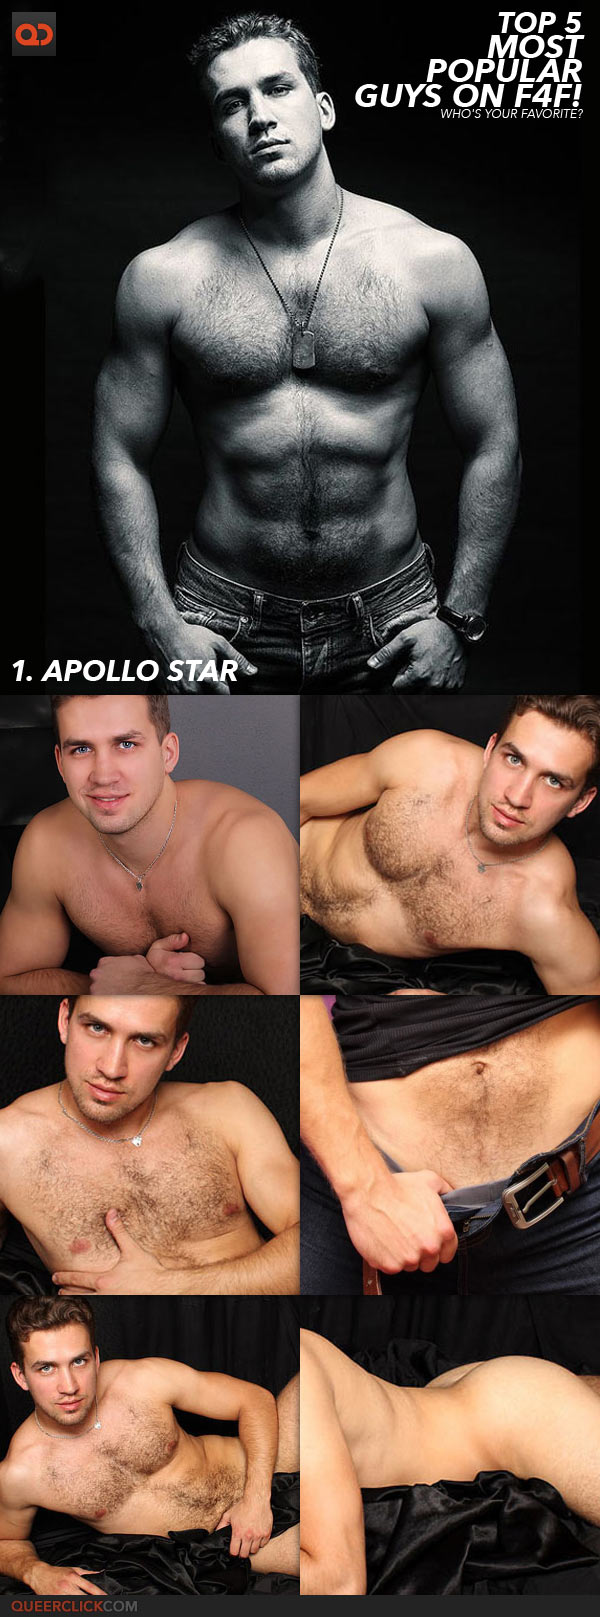 qc-TOP_5__most_popular_f4f_guys-collage01